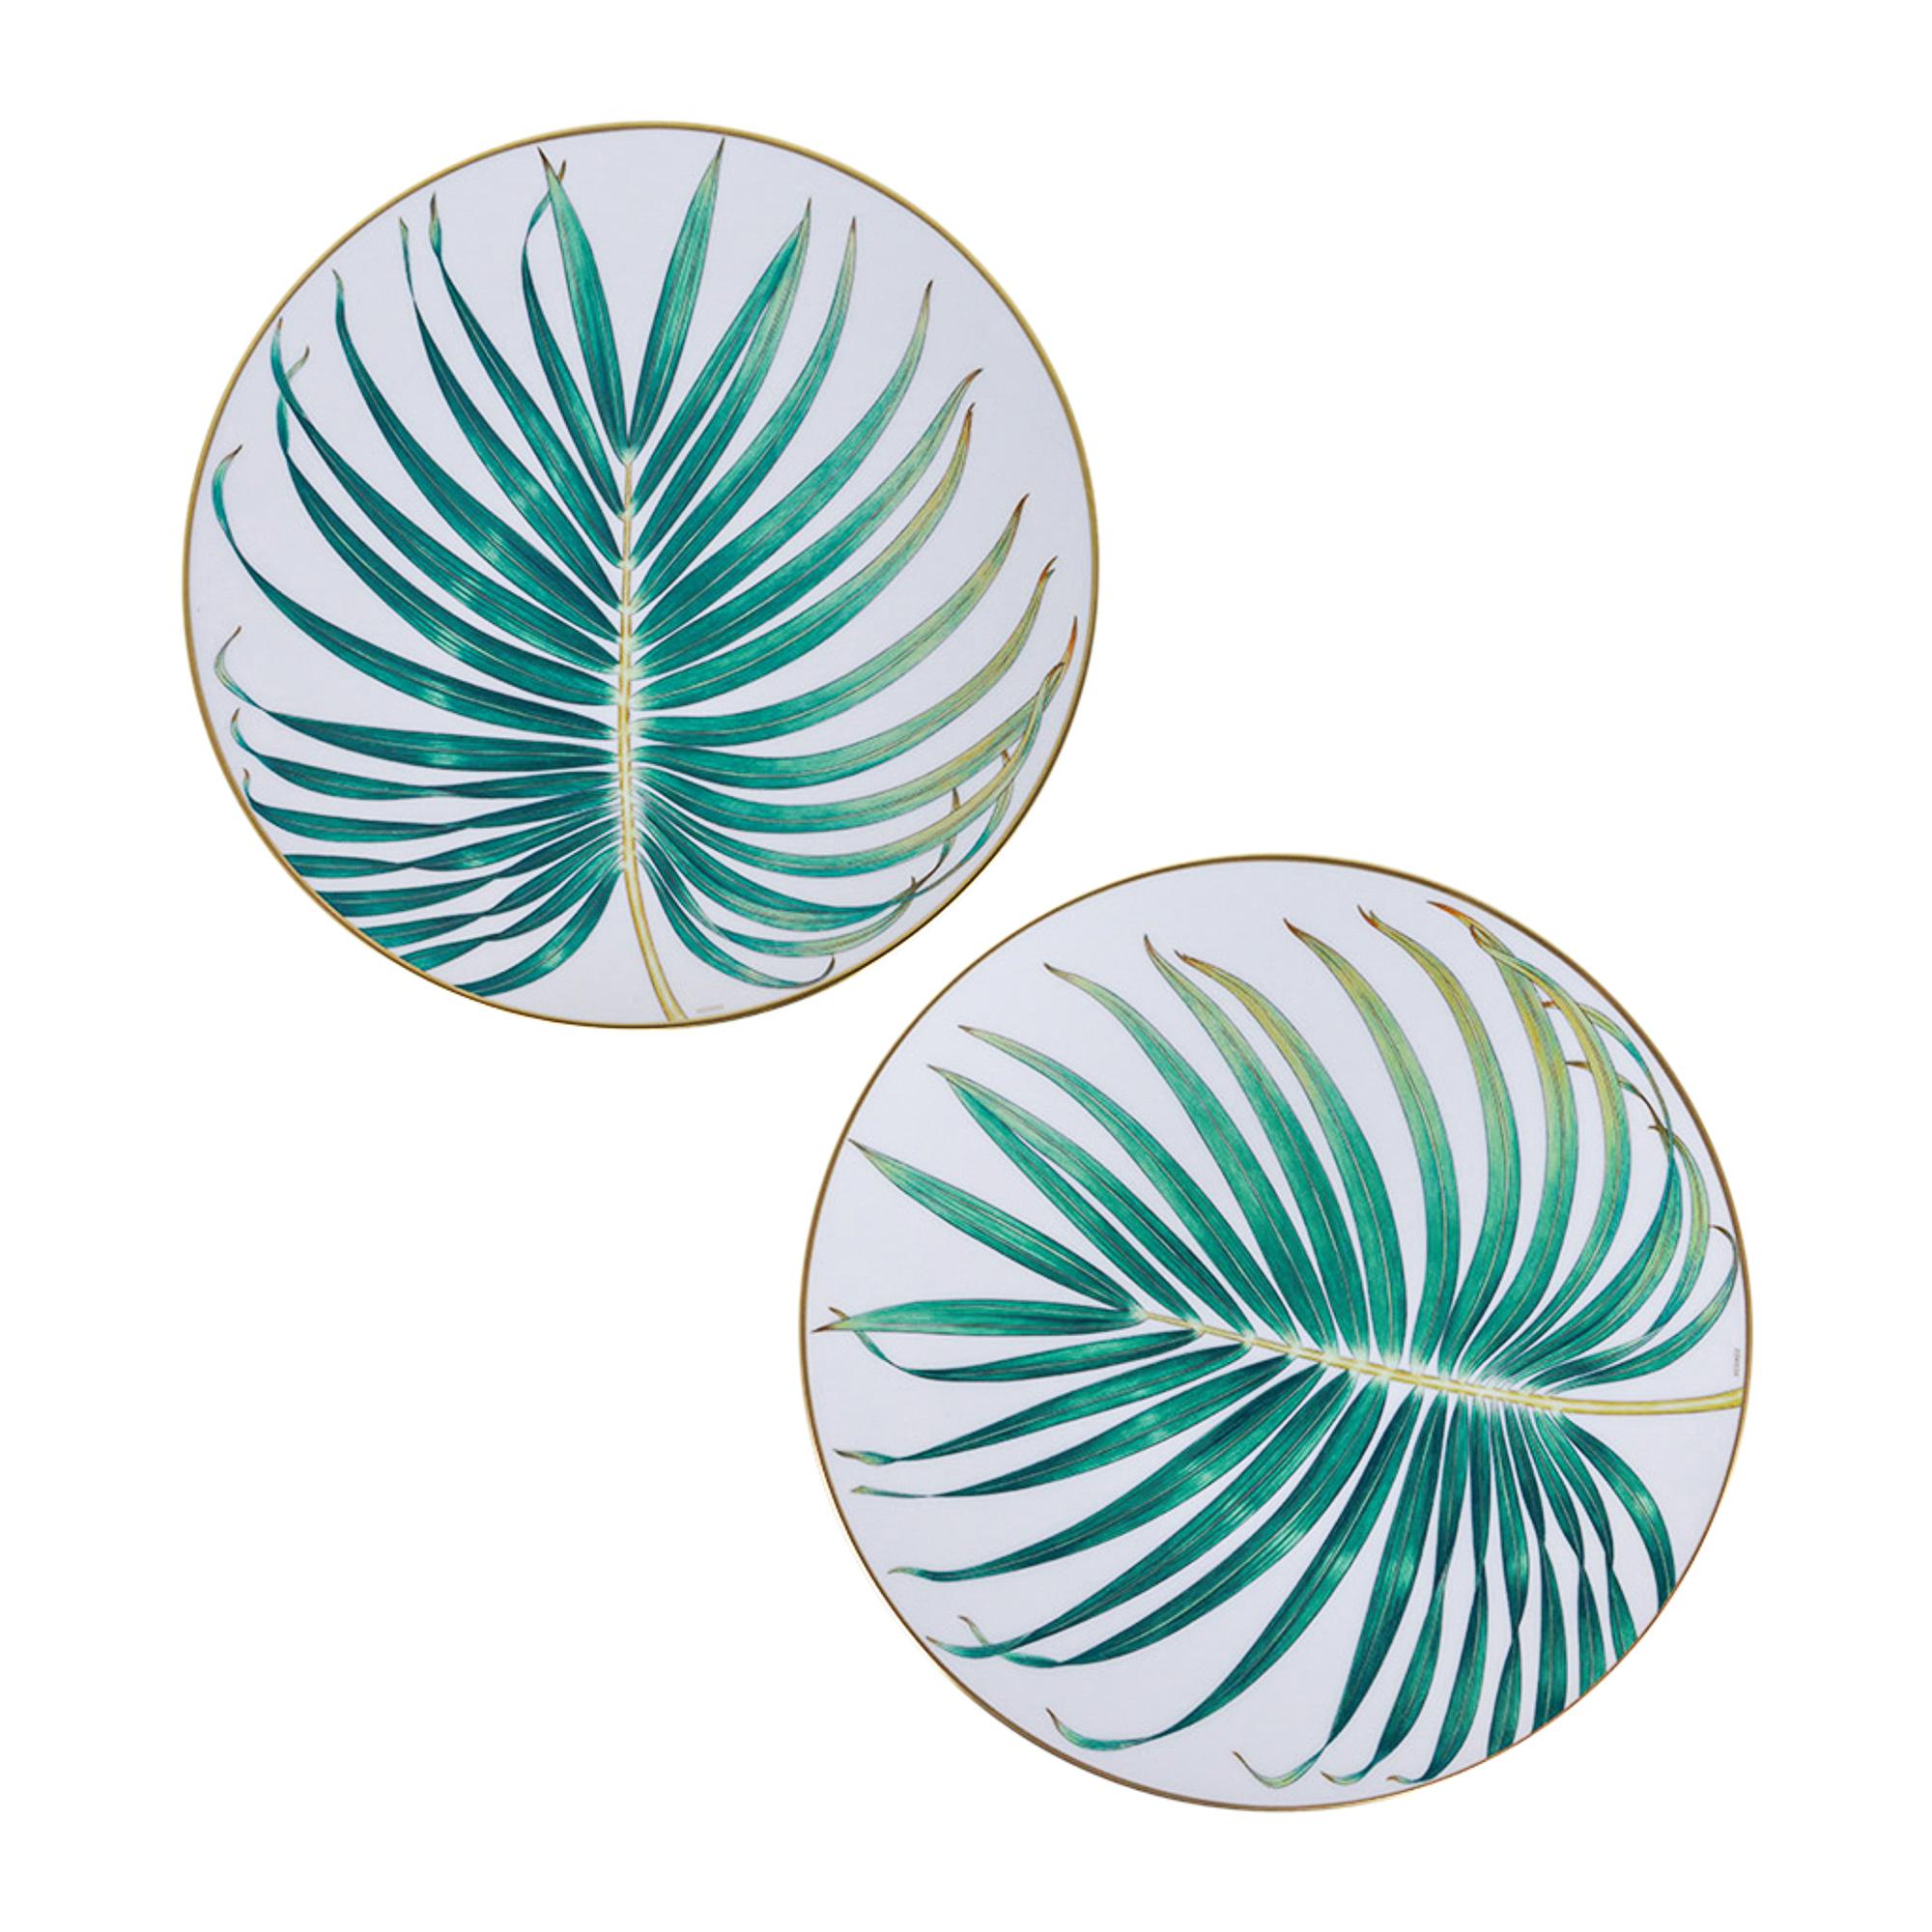 Mightychic offers an Hermes Dinner Plate #2 featured in the classic Hermes Passifolia pattern.
A beautiful hommage to the peace and power of flora.
Decorated using Chromolithography.
Hand-painted 24K gold trim.
Beautiful dinner plate to use with the